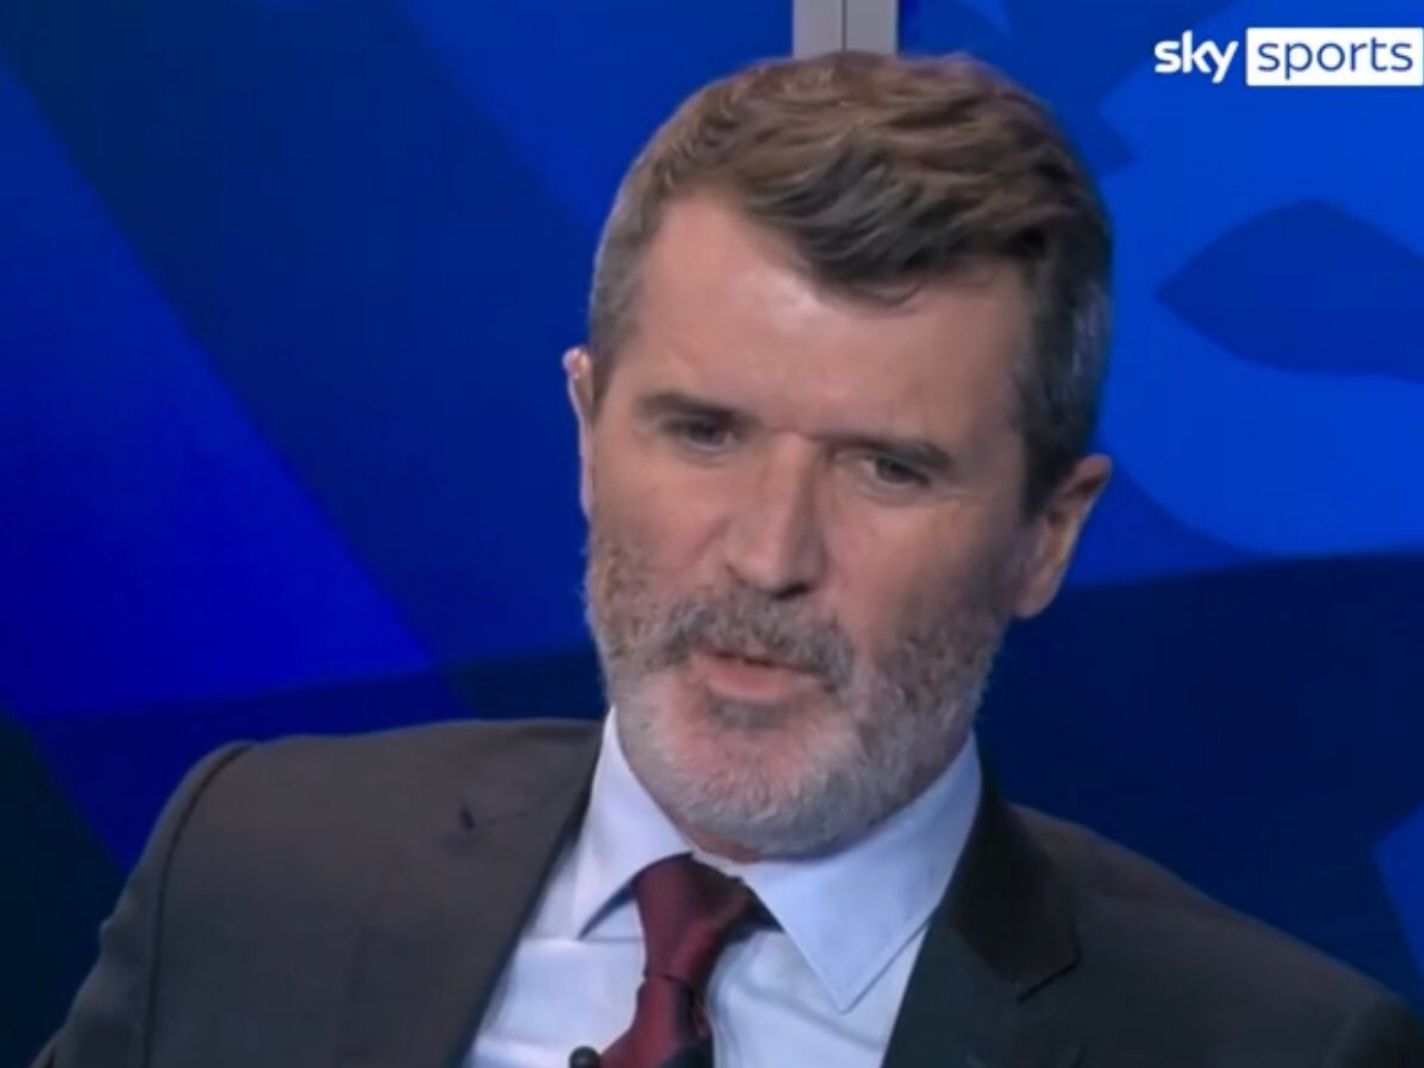 Roy Keane mocks how Harry Maguire speaks with savage pre-match lampoonery